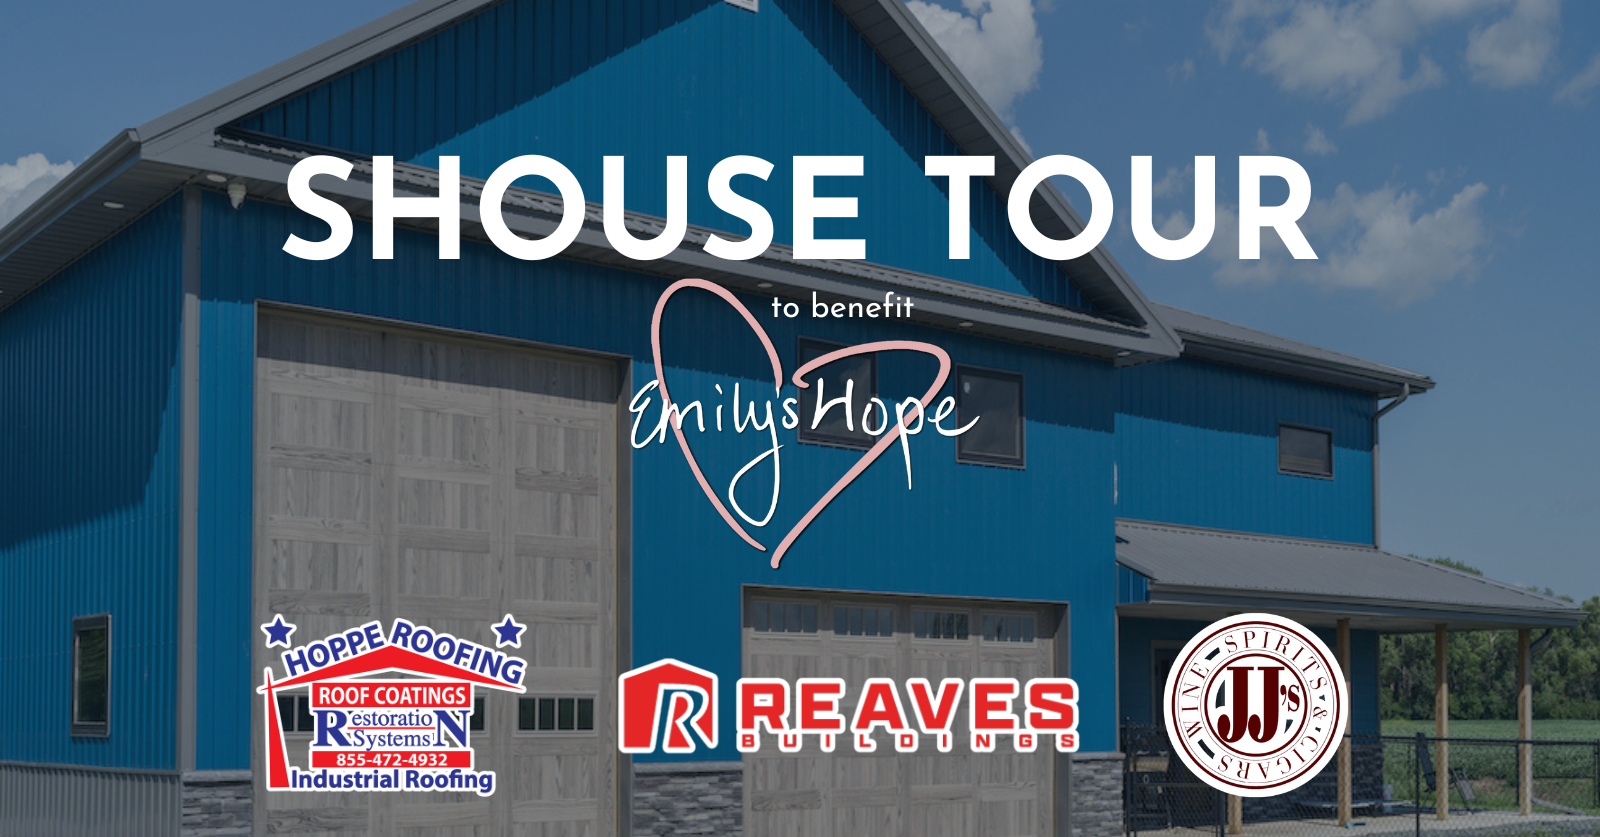 Shouse Tour to benefit Emily’s Hope